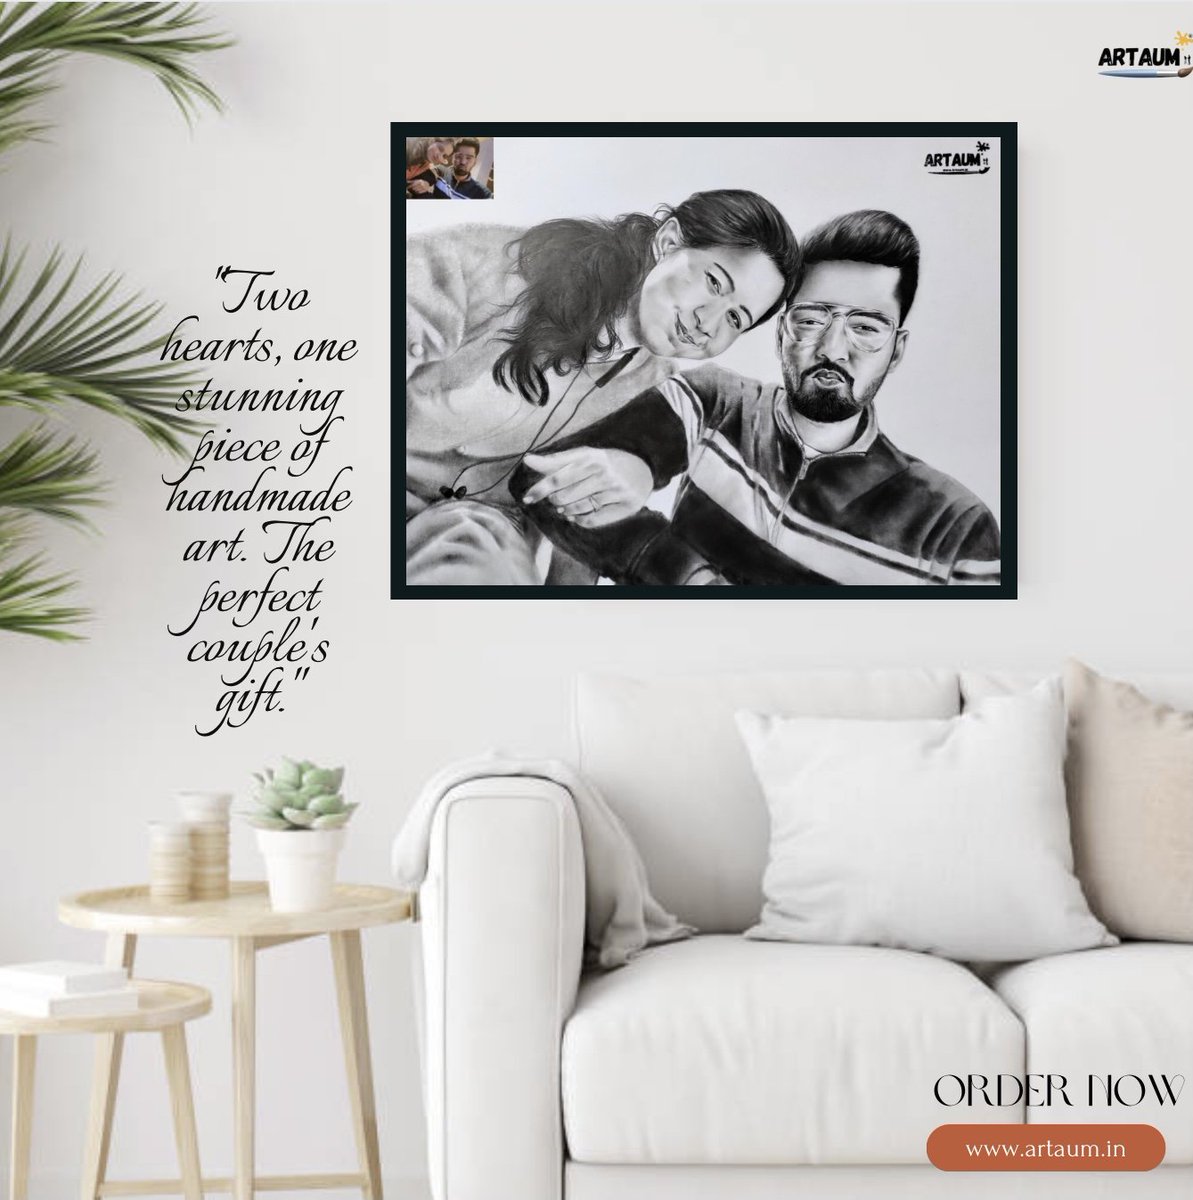 Two hearts, one stunning piece of handmade art. The perfect couple's gift. . . . #art #coupleart #couplesketch #portrait #bestgiftforcouple #artaum